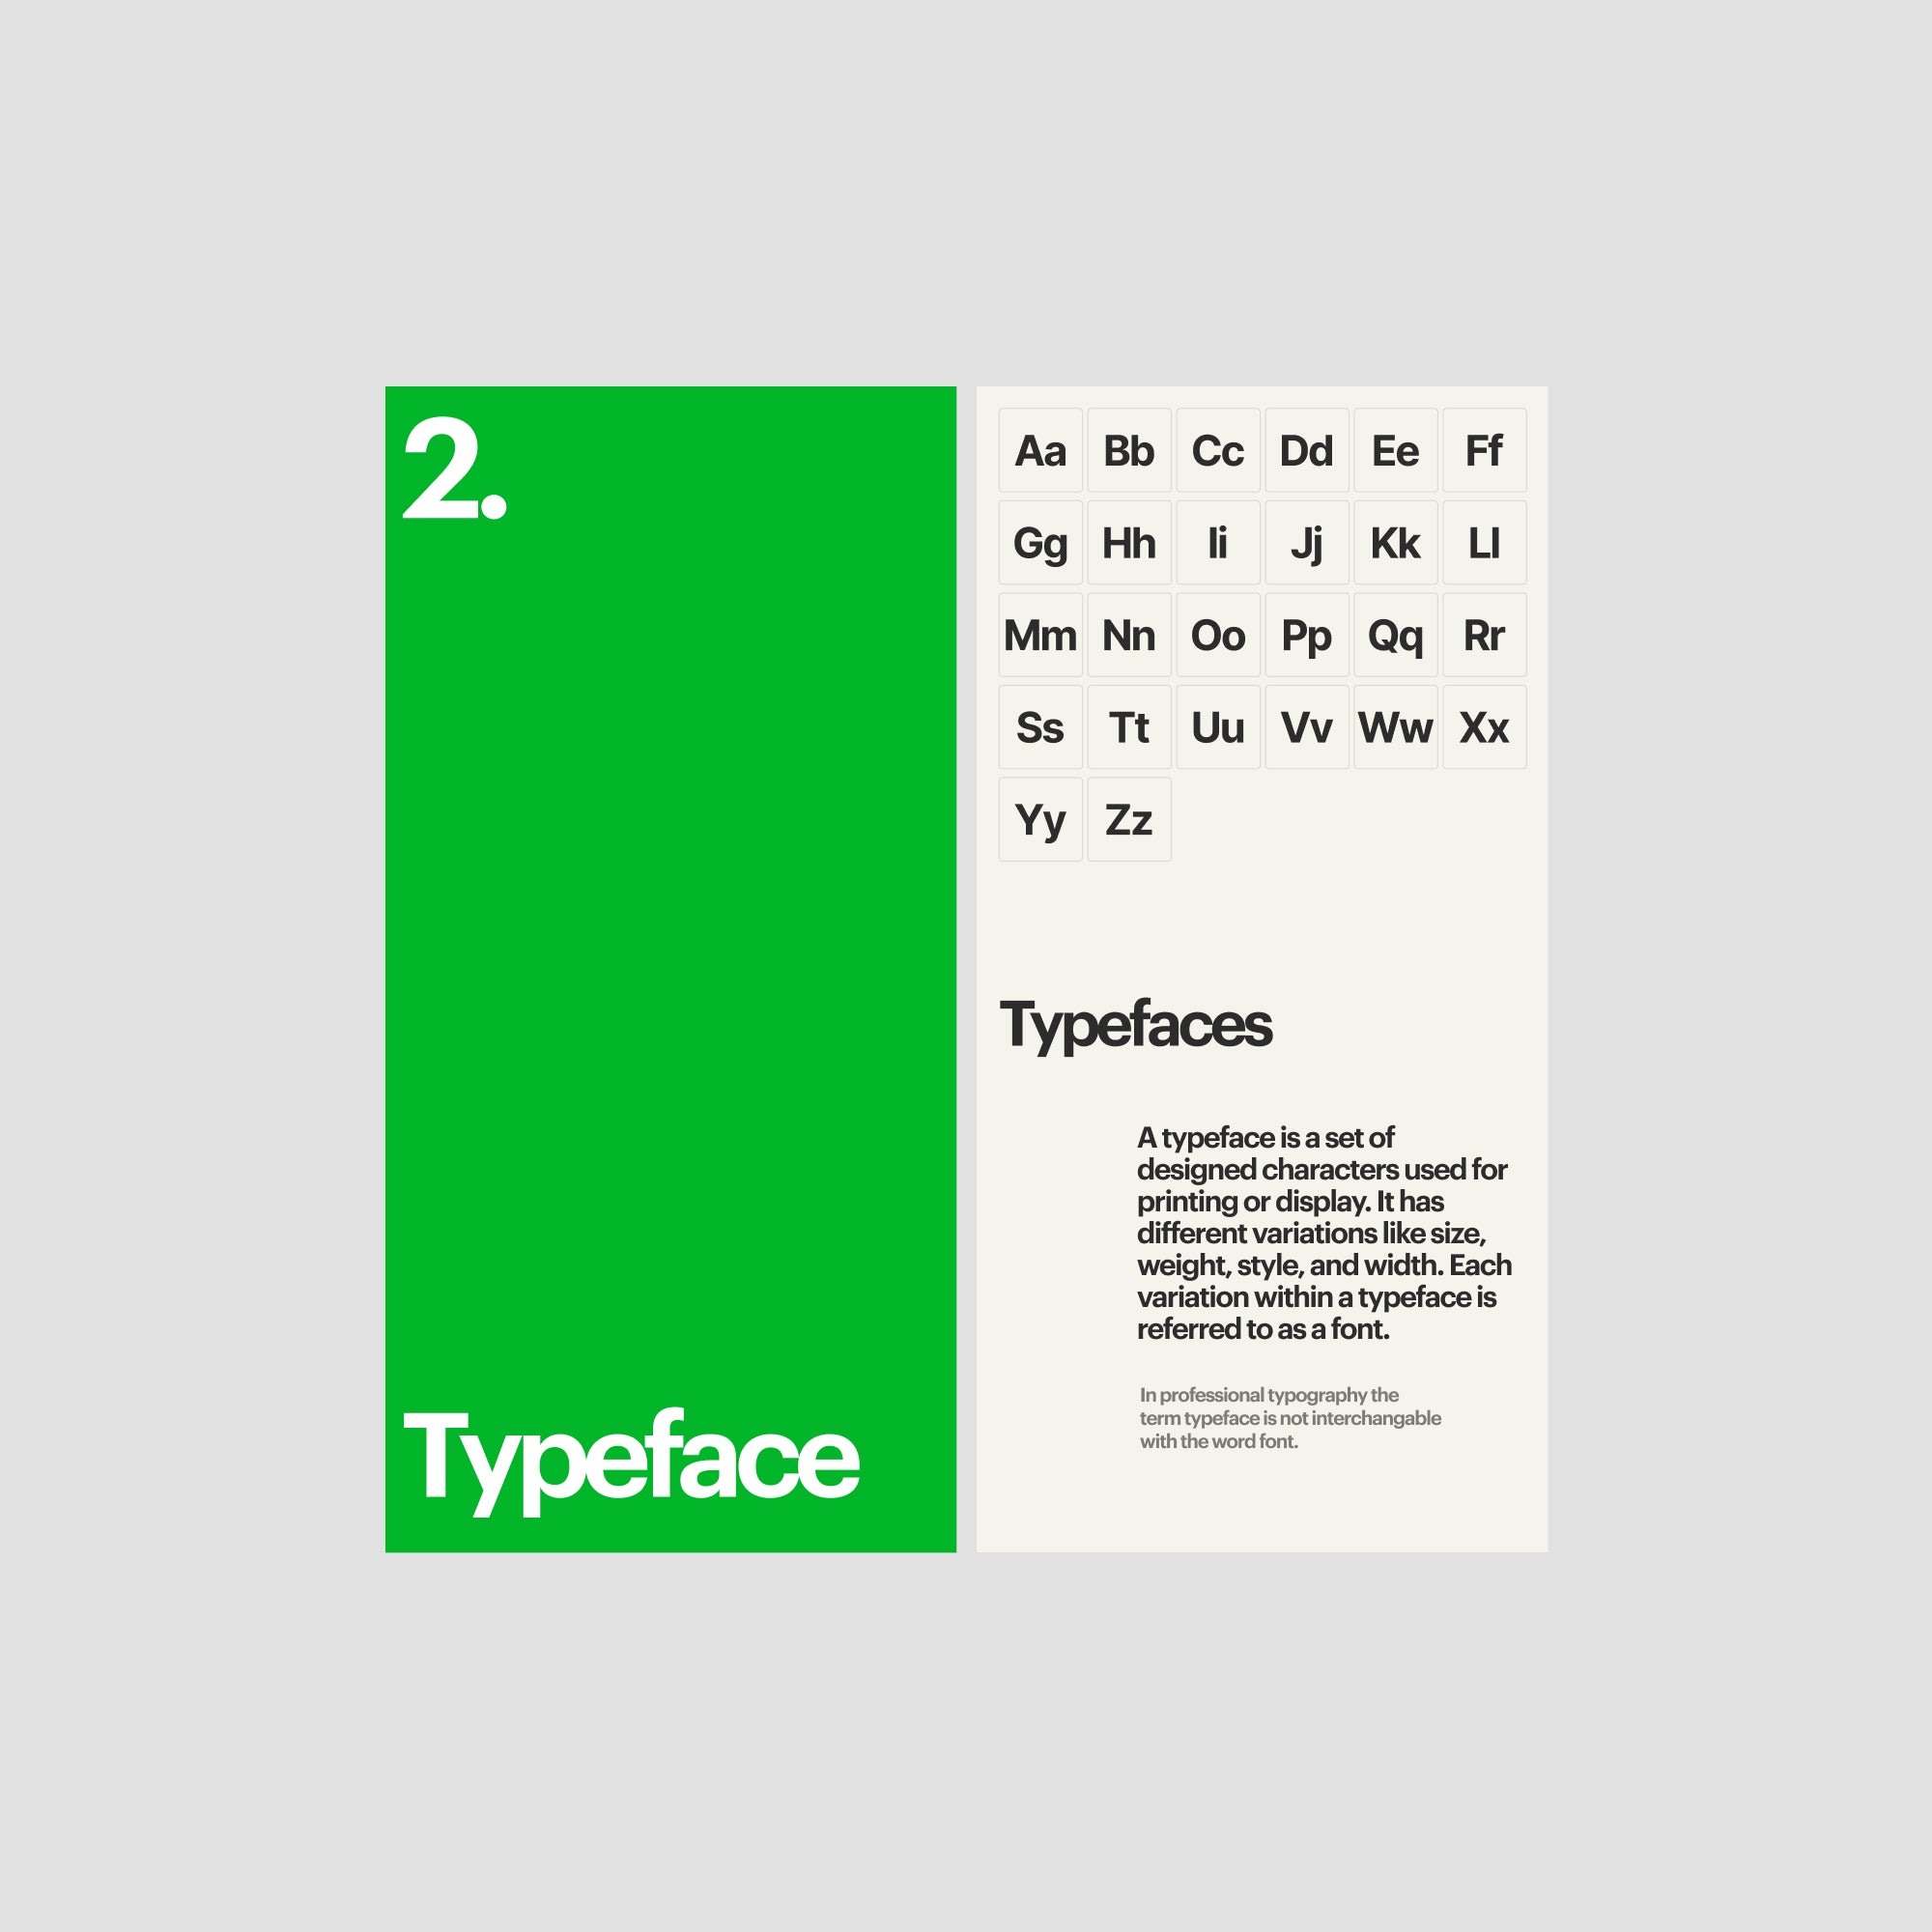 Analogue Type Guide